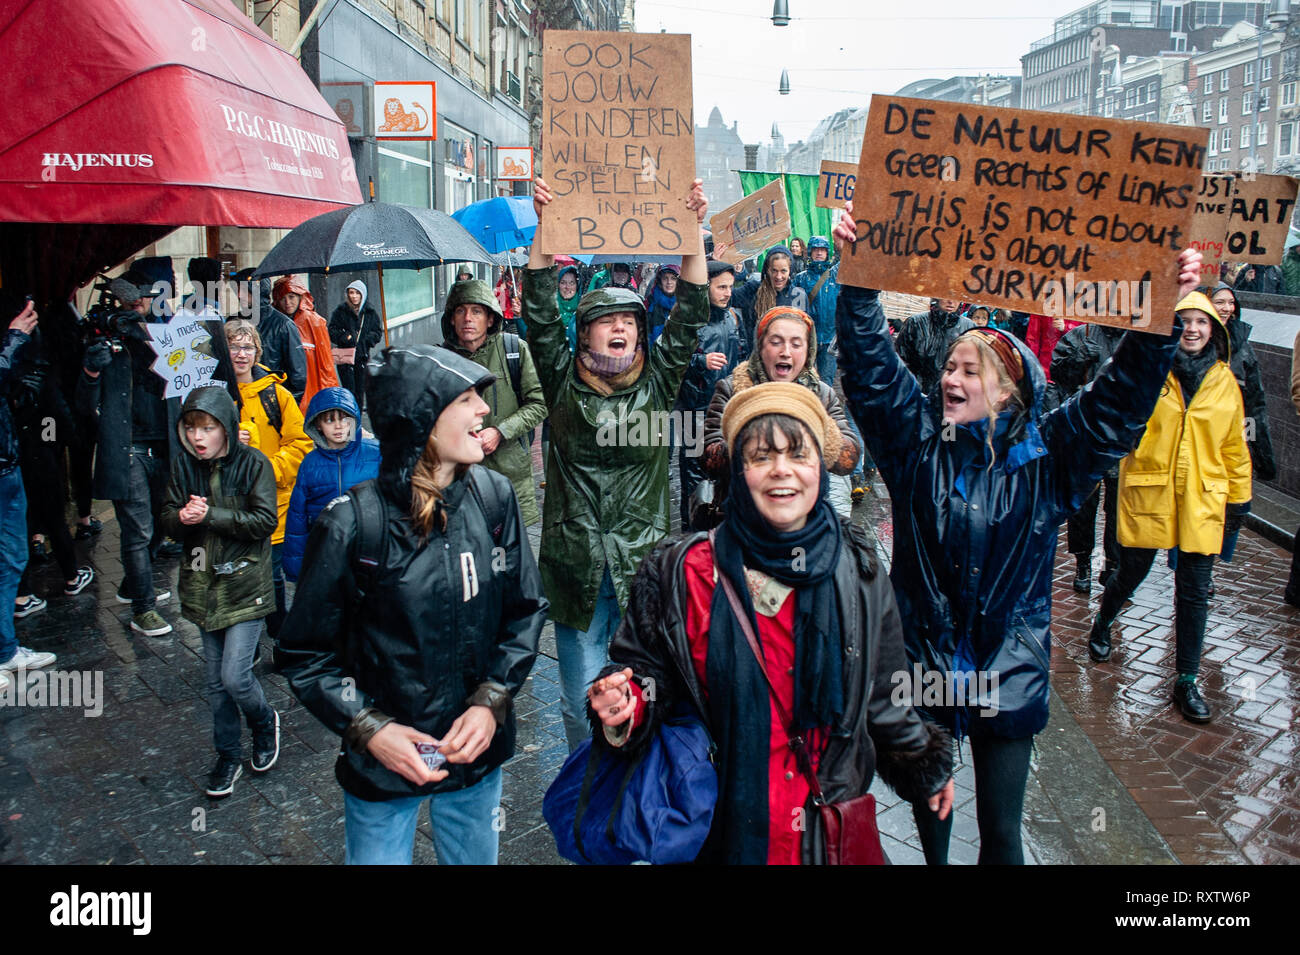 A group of women are seen holding placards while shouting slogans under the rain during the march. The largest climate strike in the Netherlands. This demonstration took place at the Dam square, in the center of Amsterdam. Thousands of people gathered to demand green energy affordable for everyone, big polluters have to pay their fair share, should be a fair distribution of the costs and benefits of the climate transition, and good green jobs. Stock Photo